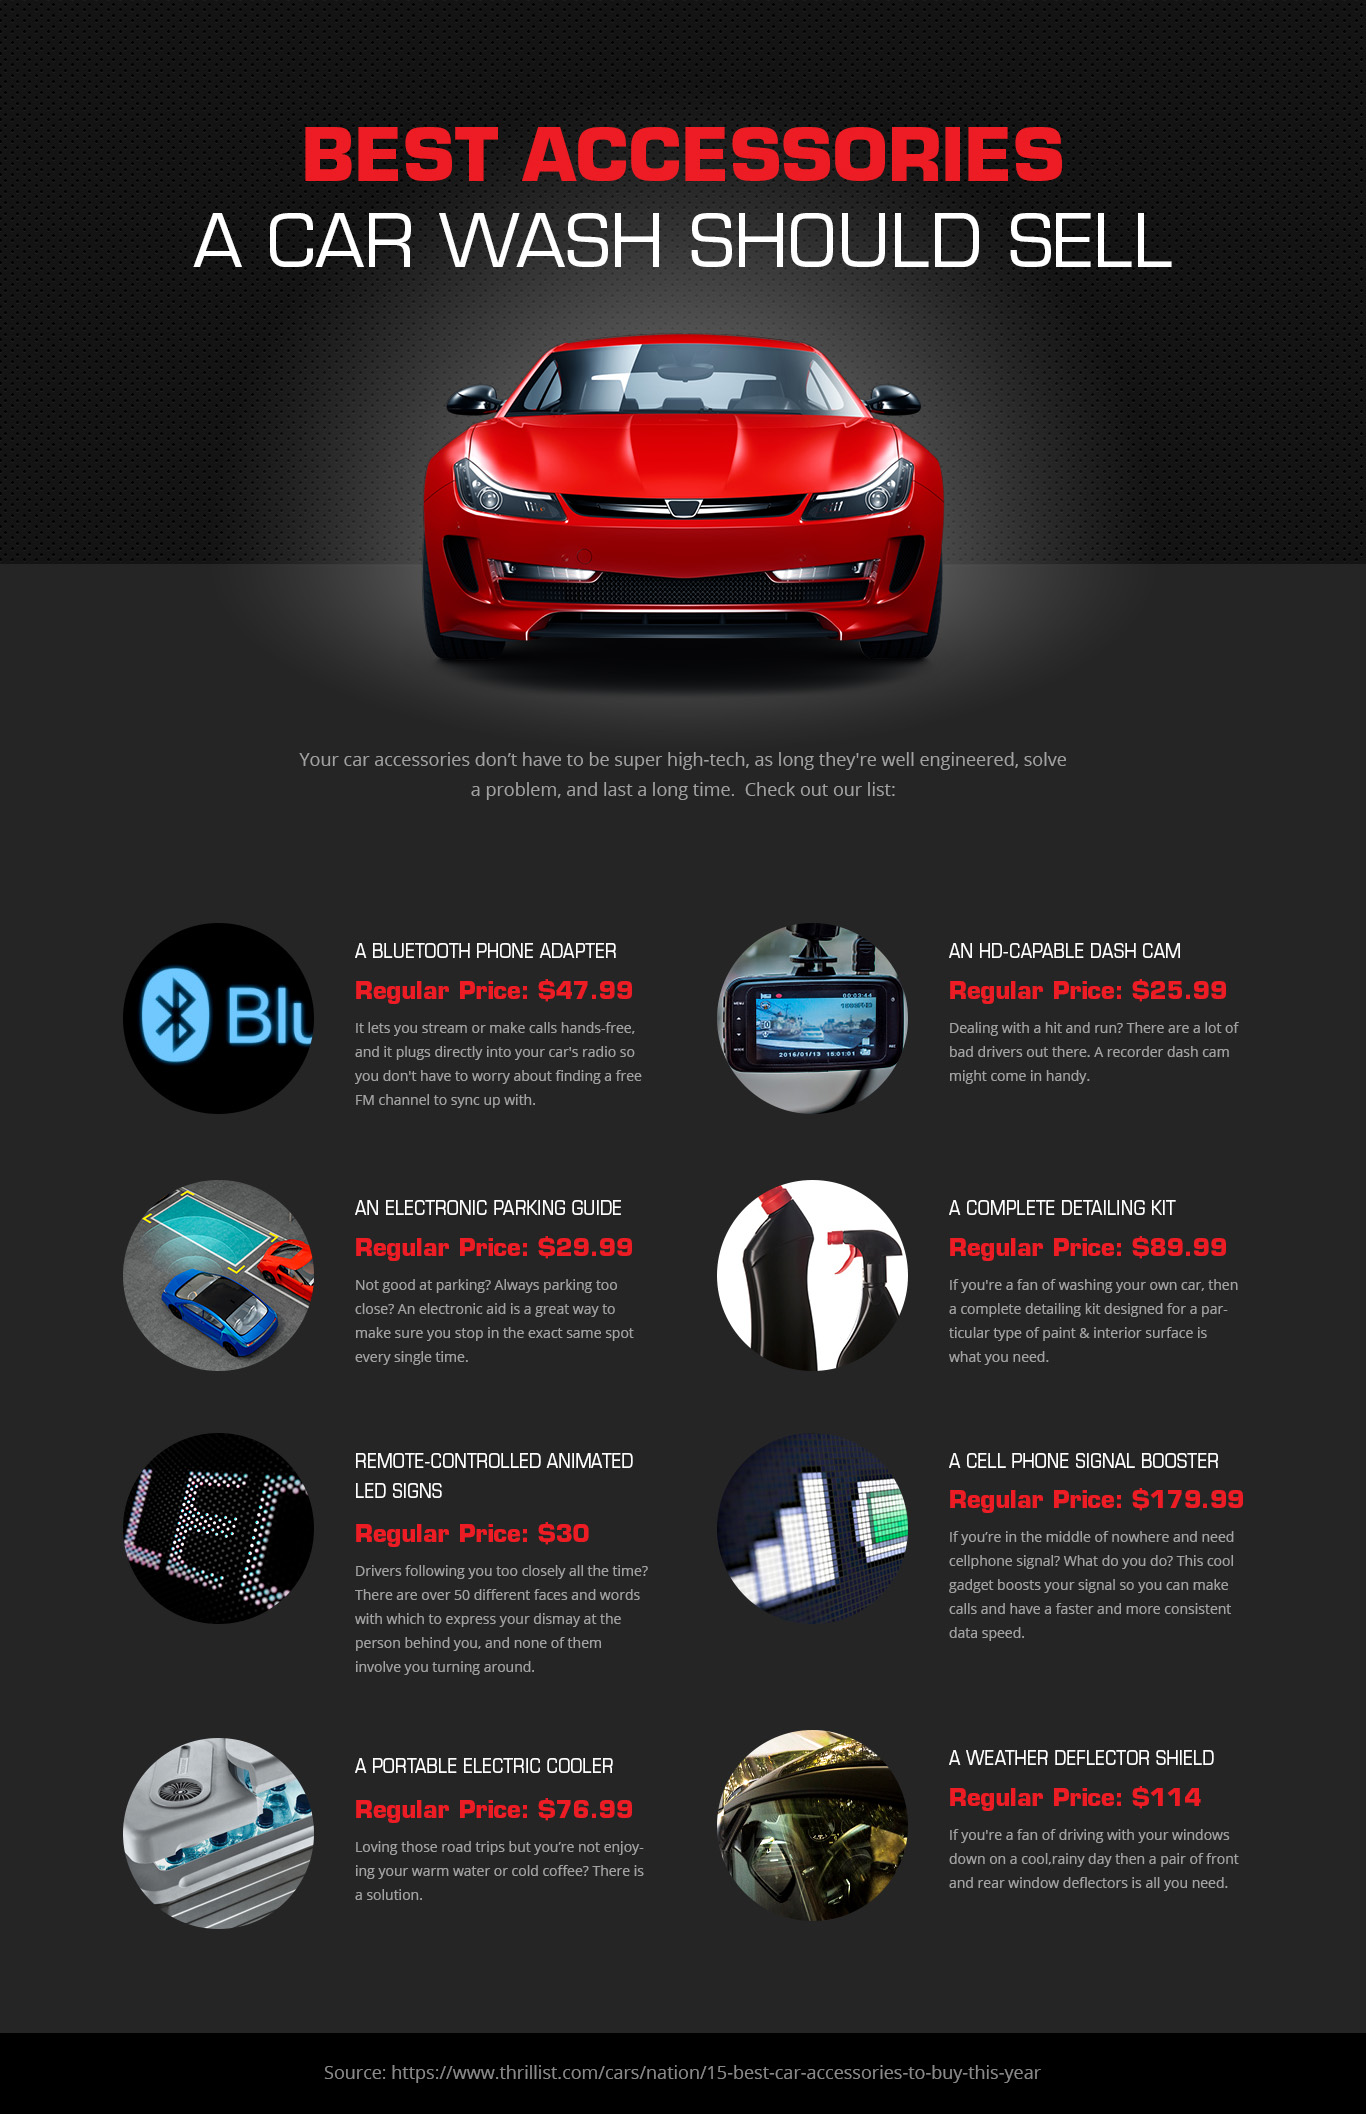 best-accessories-a-car-wash-should-sell-infographic